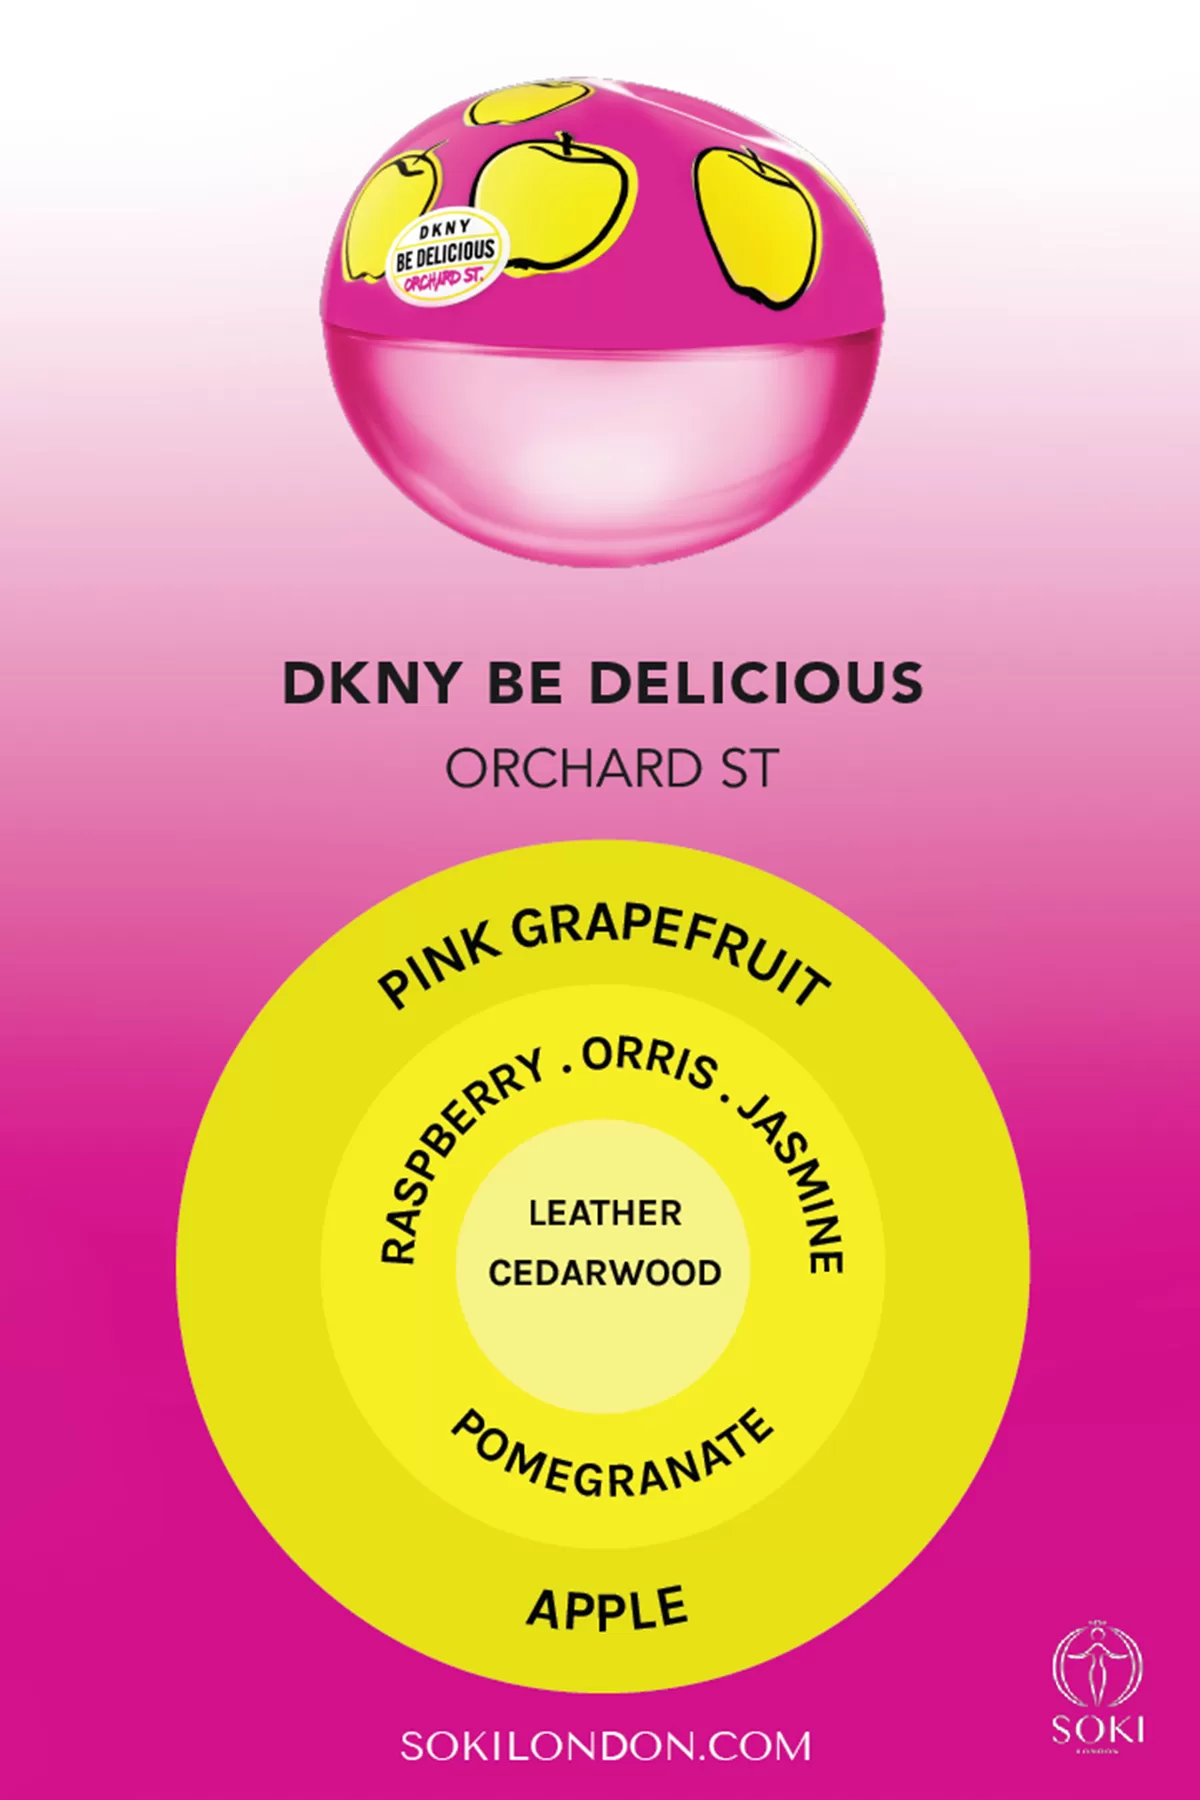 DKNY Be Delicious Orchard St